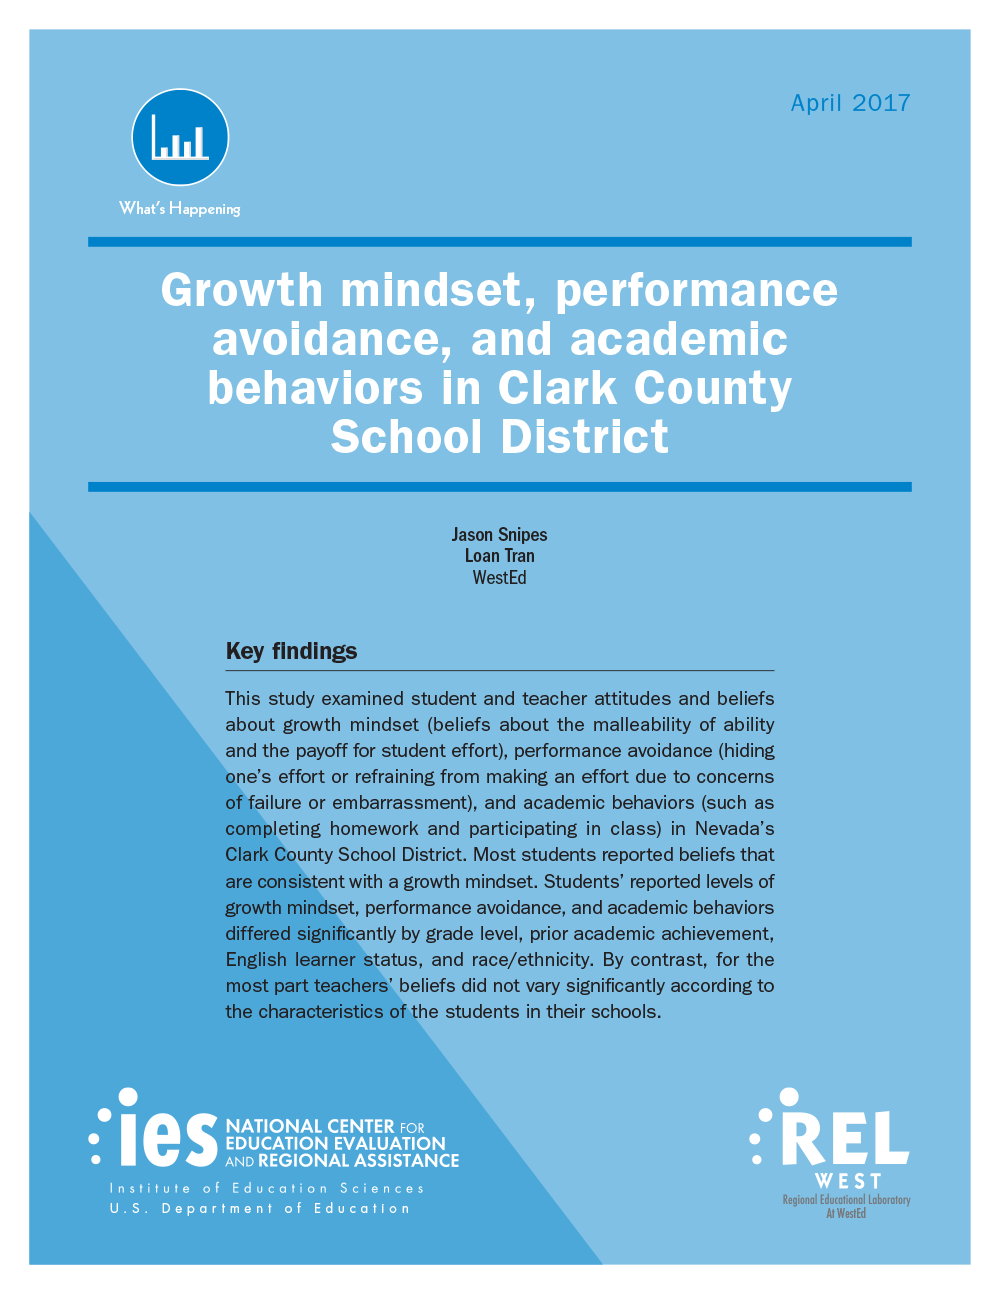 Growth Mindset, Performance Avoidance, and Academic Behaviors in Clark County School District